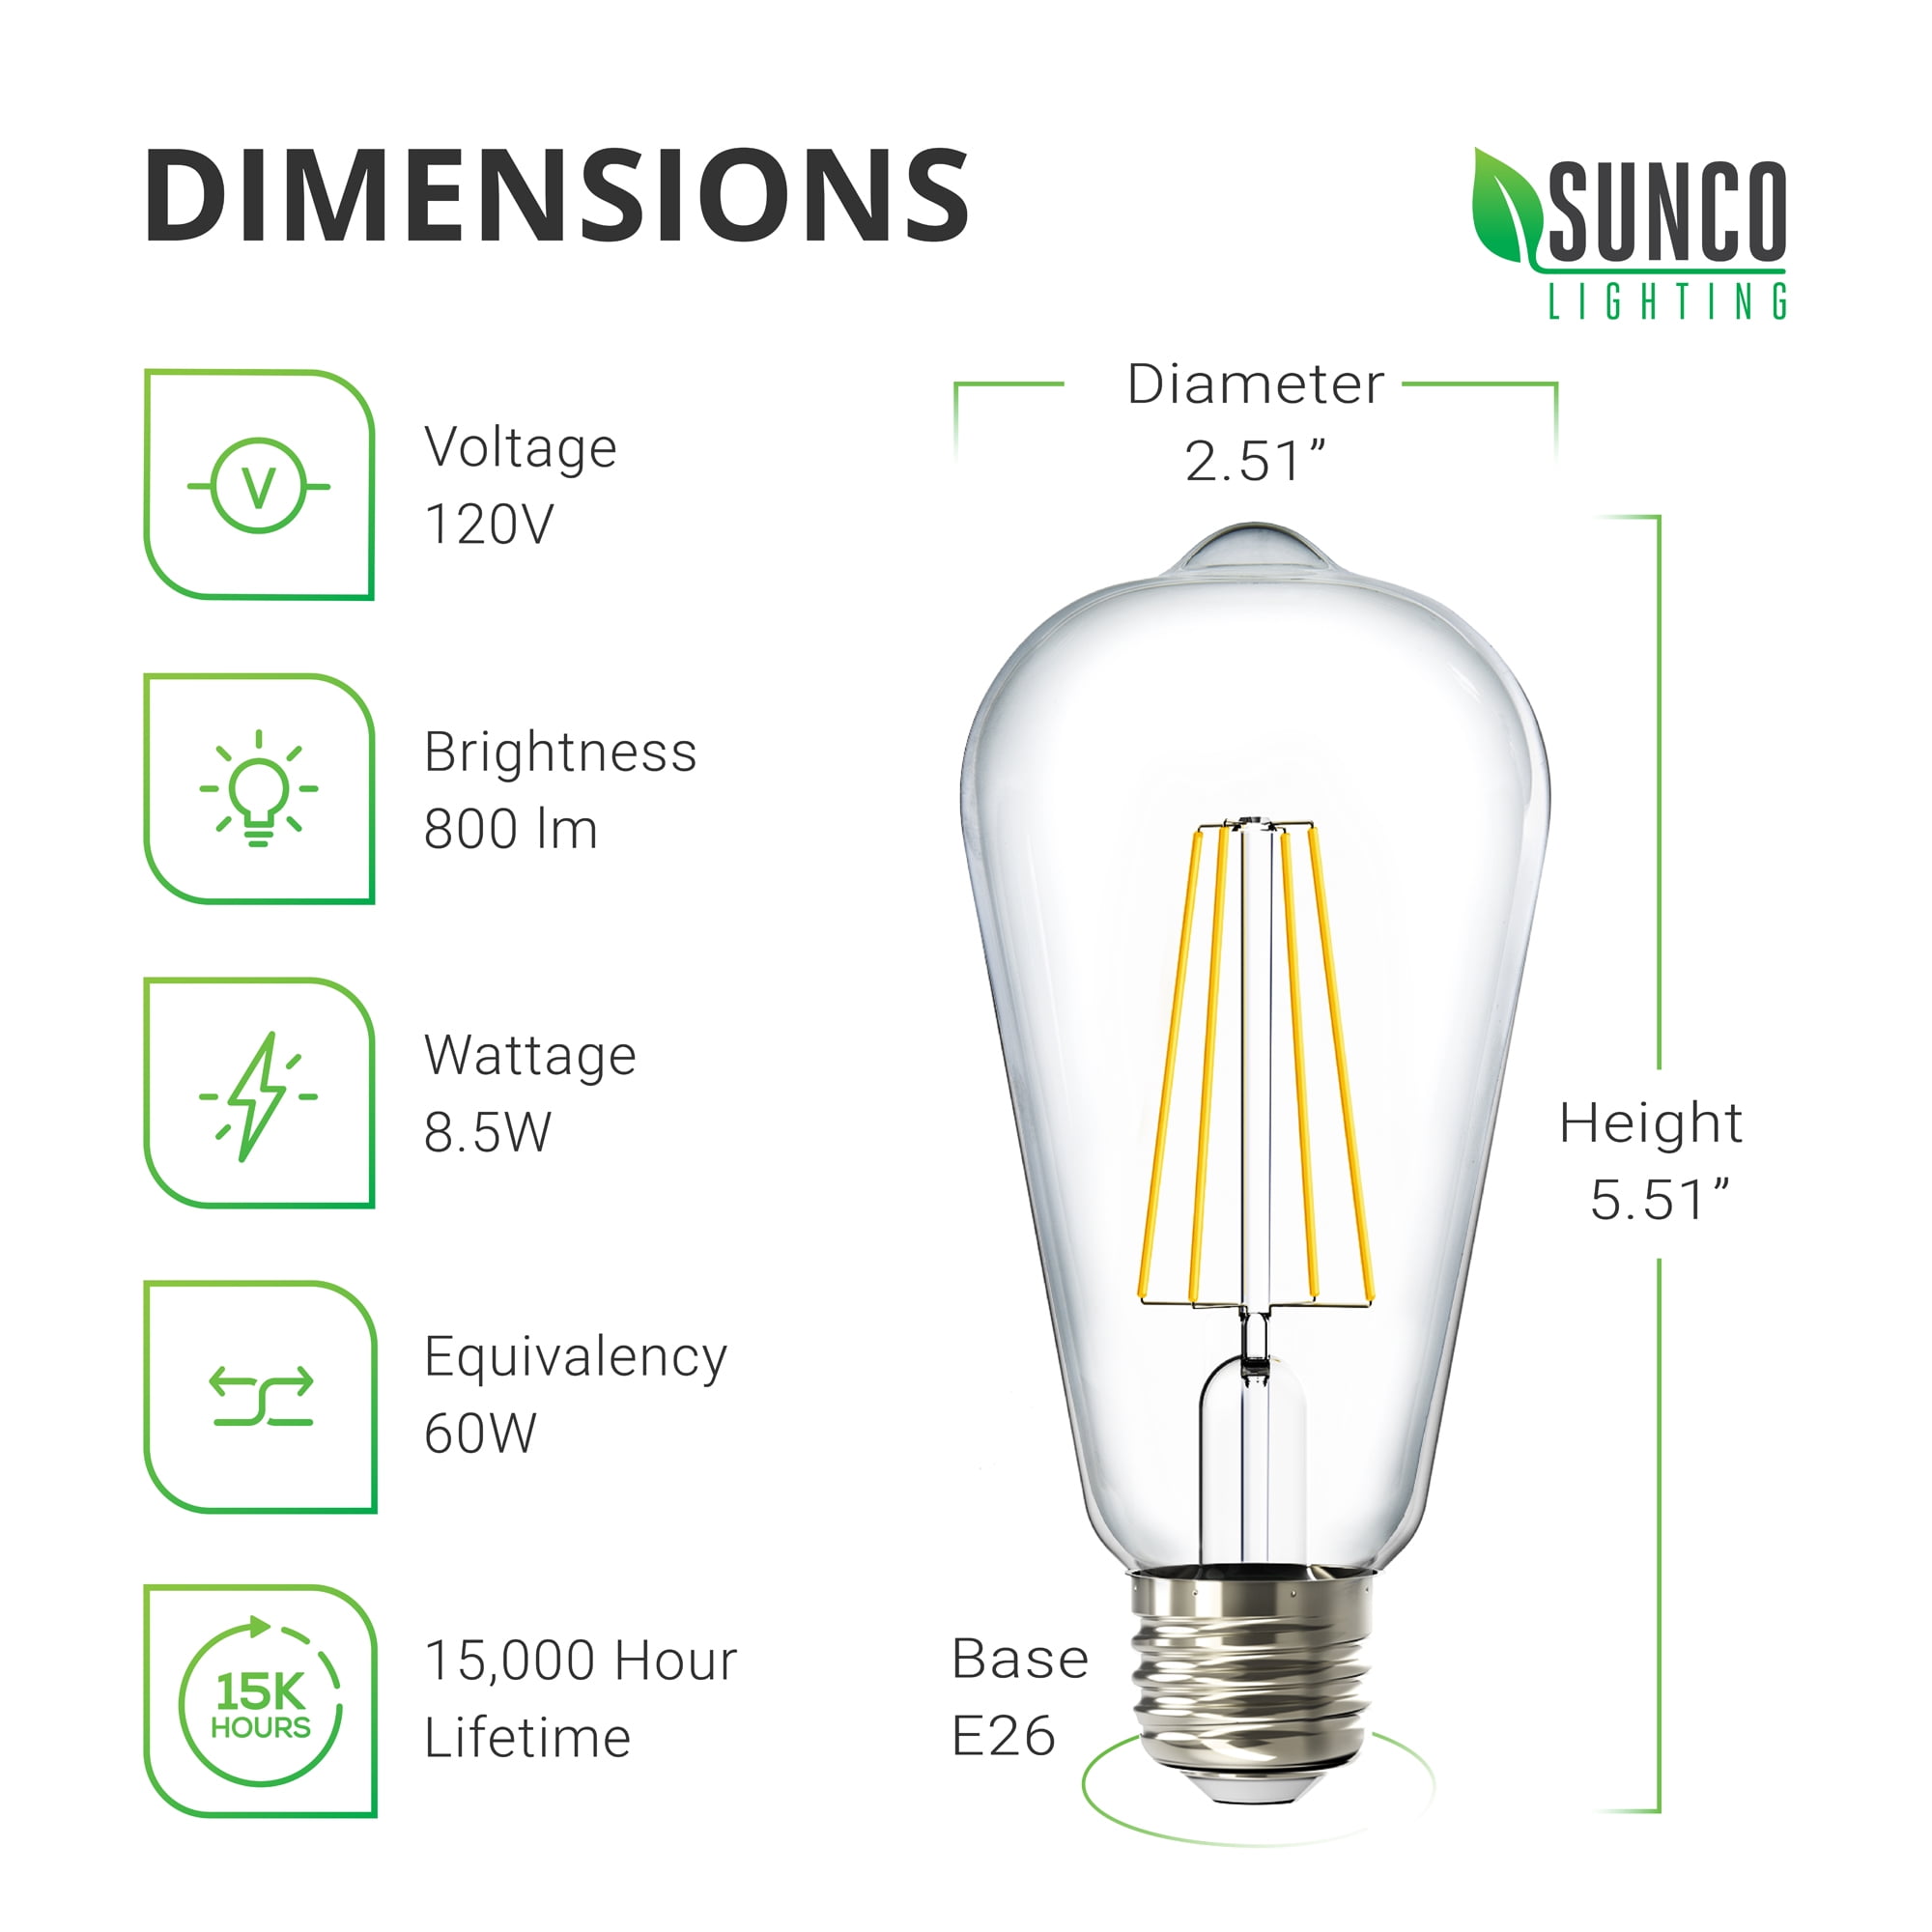 6 Pack Sunco Lighting LED Edison Bulb Vintage 60W Equivalent 8.5W Clear Glass UL 6000K Daylight Deluxe 800 LM Restaurant String Lights Dimmable ST64 Filament Waterproof E26 Base